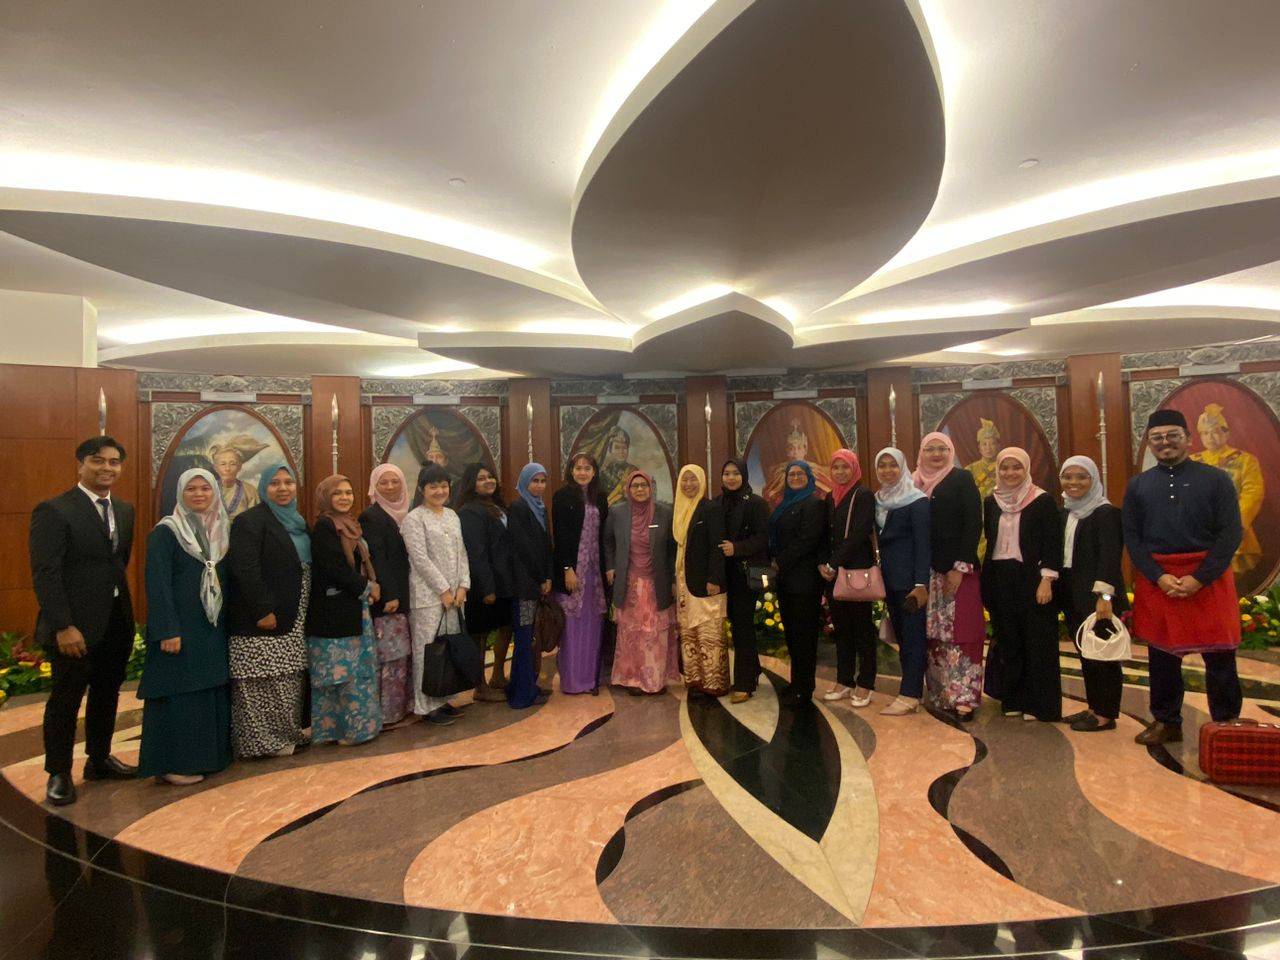 Leong during SIWANIS 2023, a Selangor state programme for women participation in policy positions helmed by Wanita Berdaya Selangor and Dr Siti Mariah Mahmud. – 